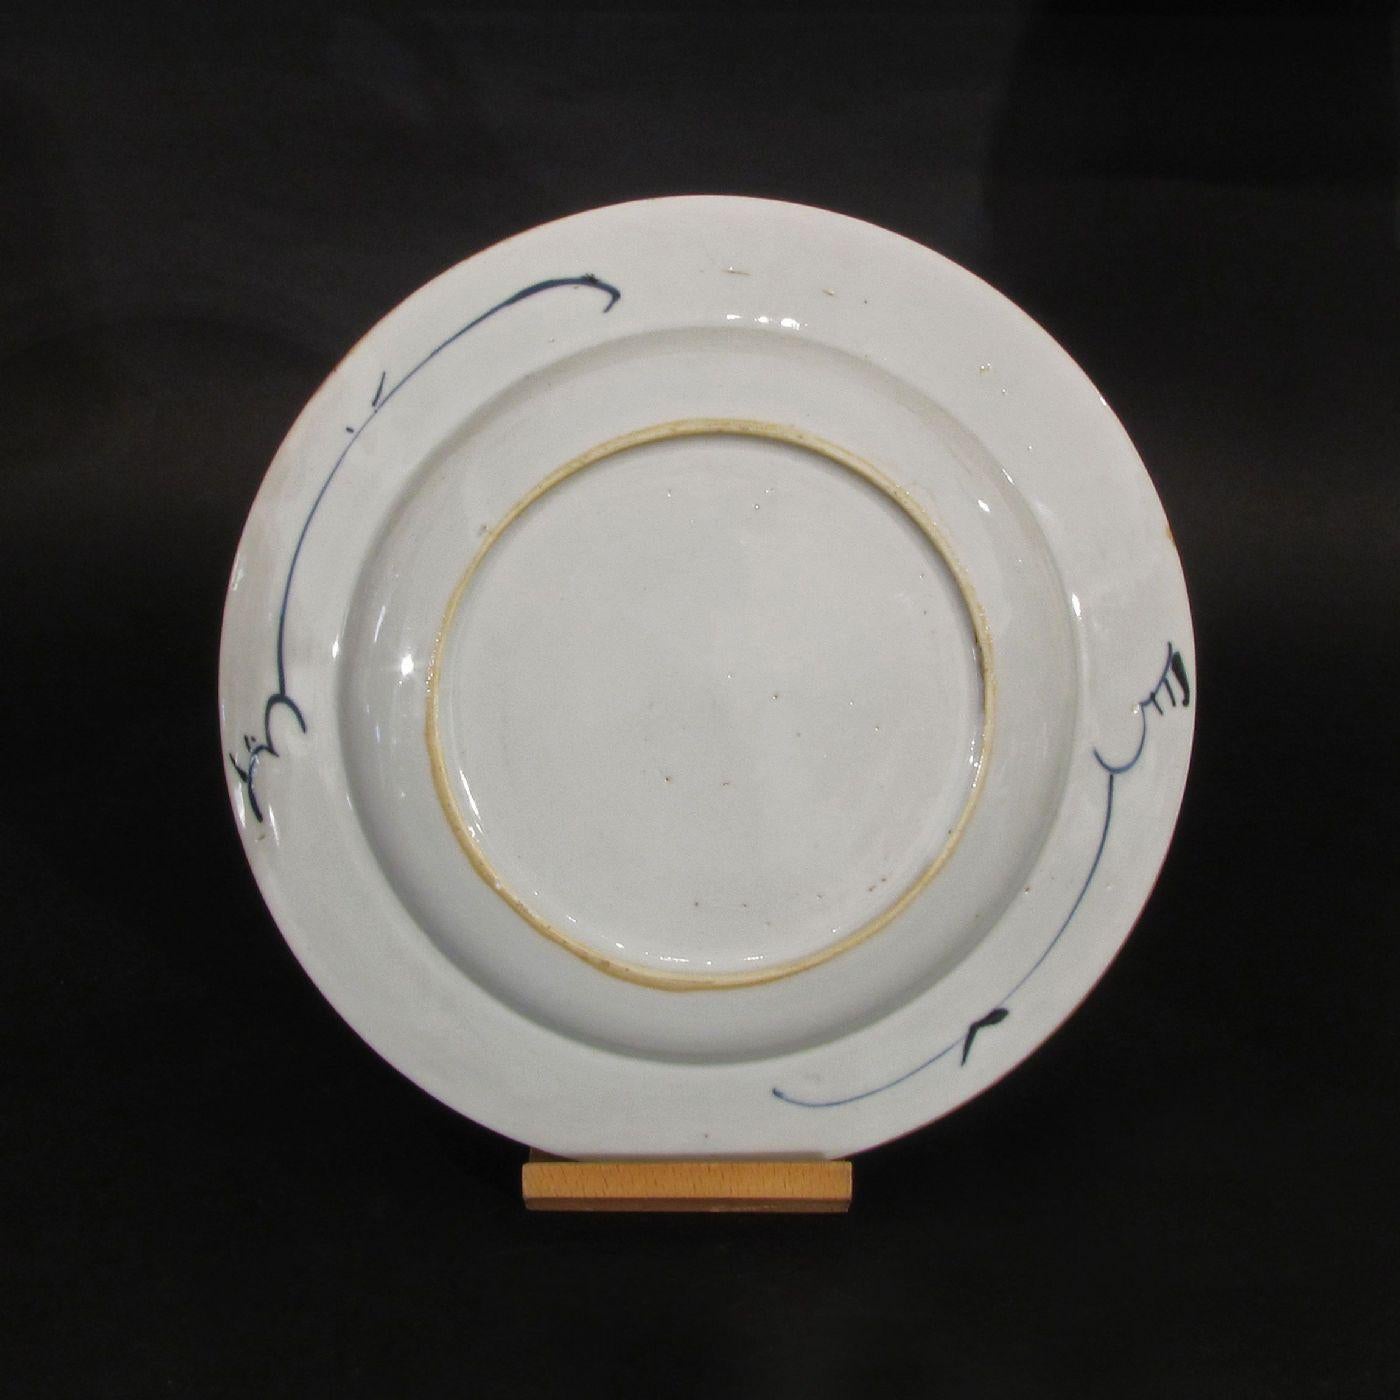 Painted Late 18th Century, Six Chinese Porcelain Plates